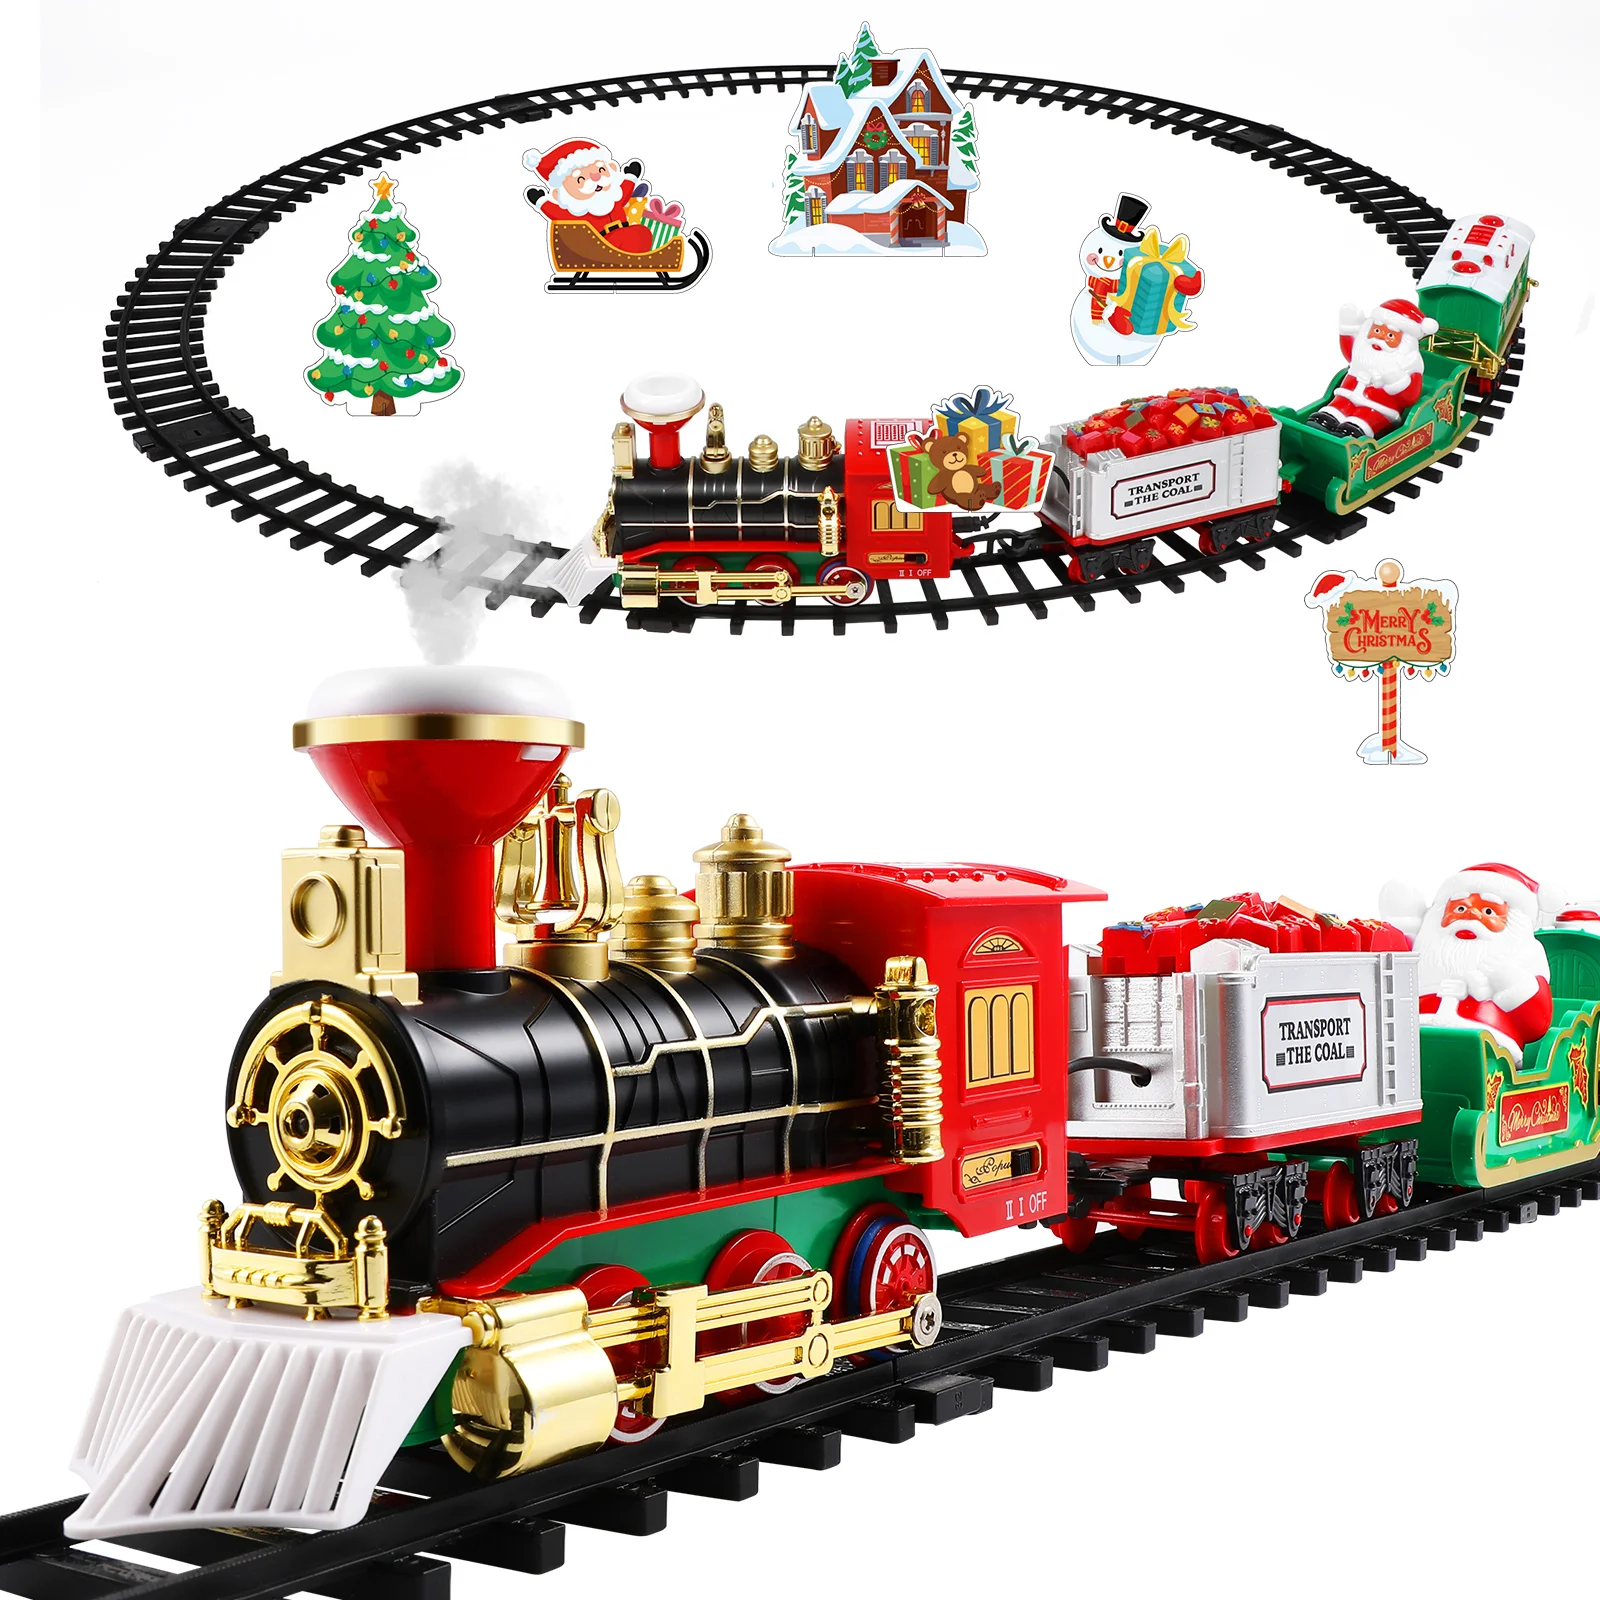 Electric Christmas Train Model Railway Tracks Toy With Sound Light Powered For Kids Birthday Party Gift train model ho 1 87 european roco 73079 231e digital sound steam orient express tractor rail car hot wheels